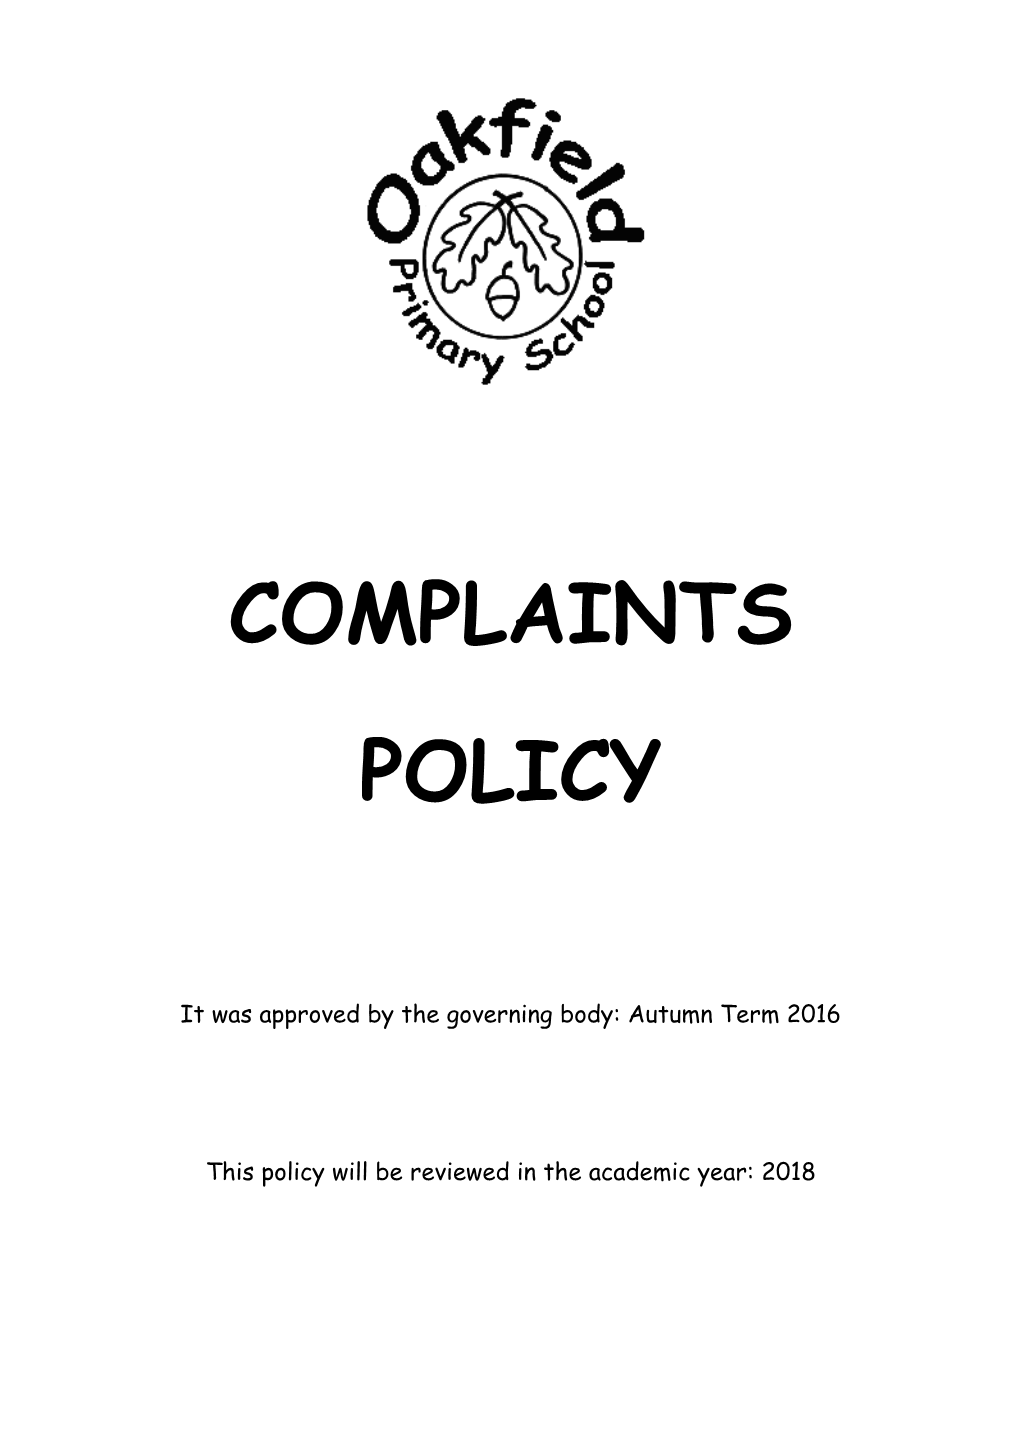 It Was Approved by the Governing Body: Autumn Term 2016